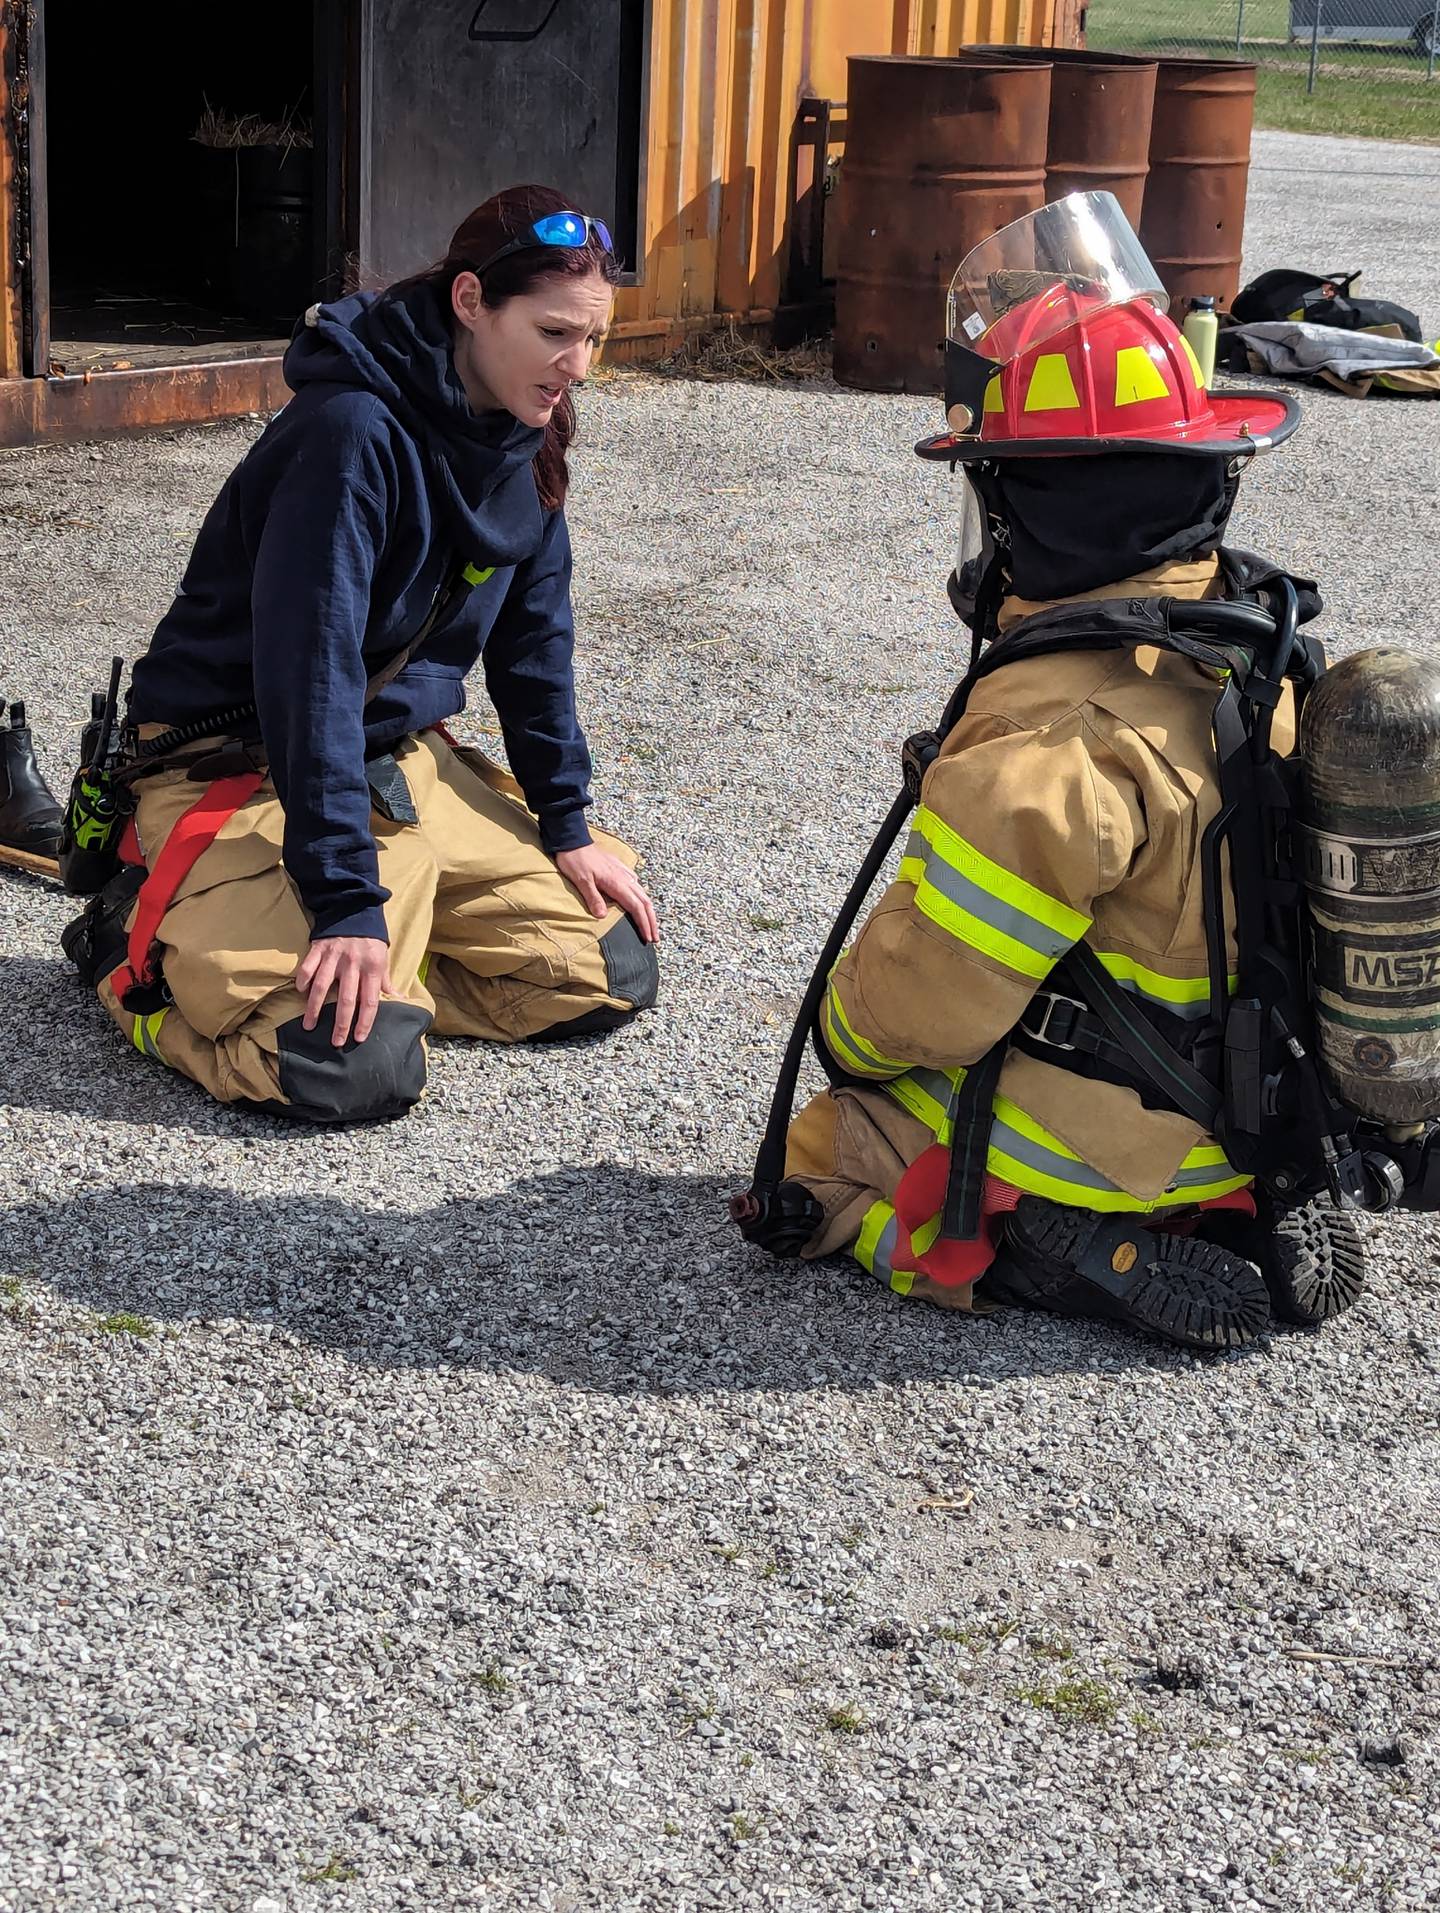 The Badd Axe Ladies firefighter training program brings together firefighters from the Carbondale Fire Department with female students from Southern Illinois University, John A. Logan College and surrounding high schools.